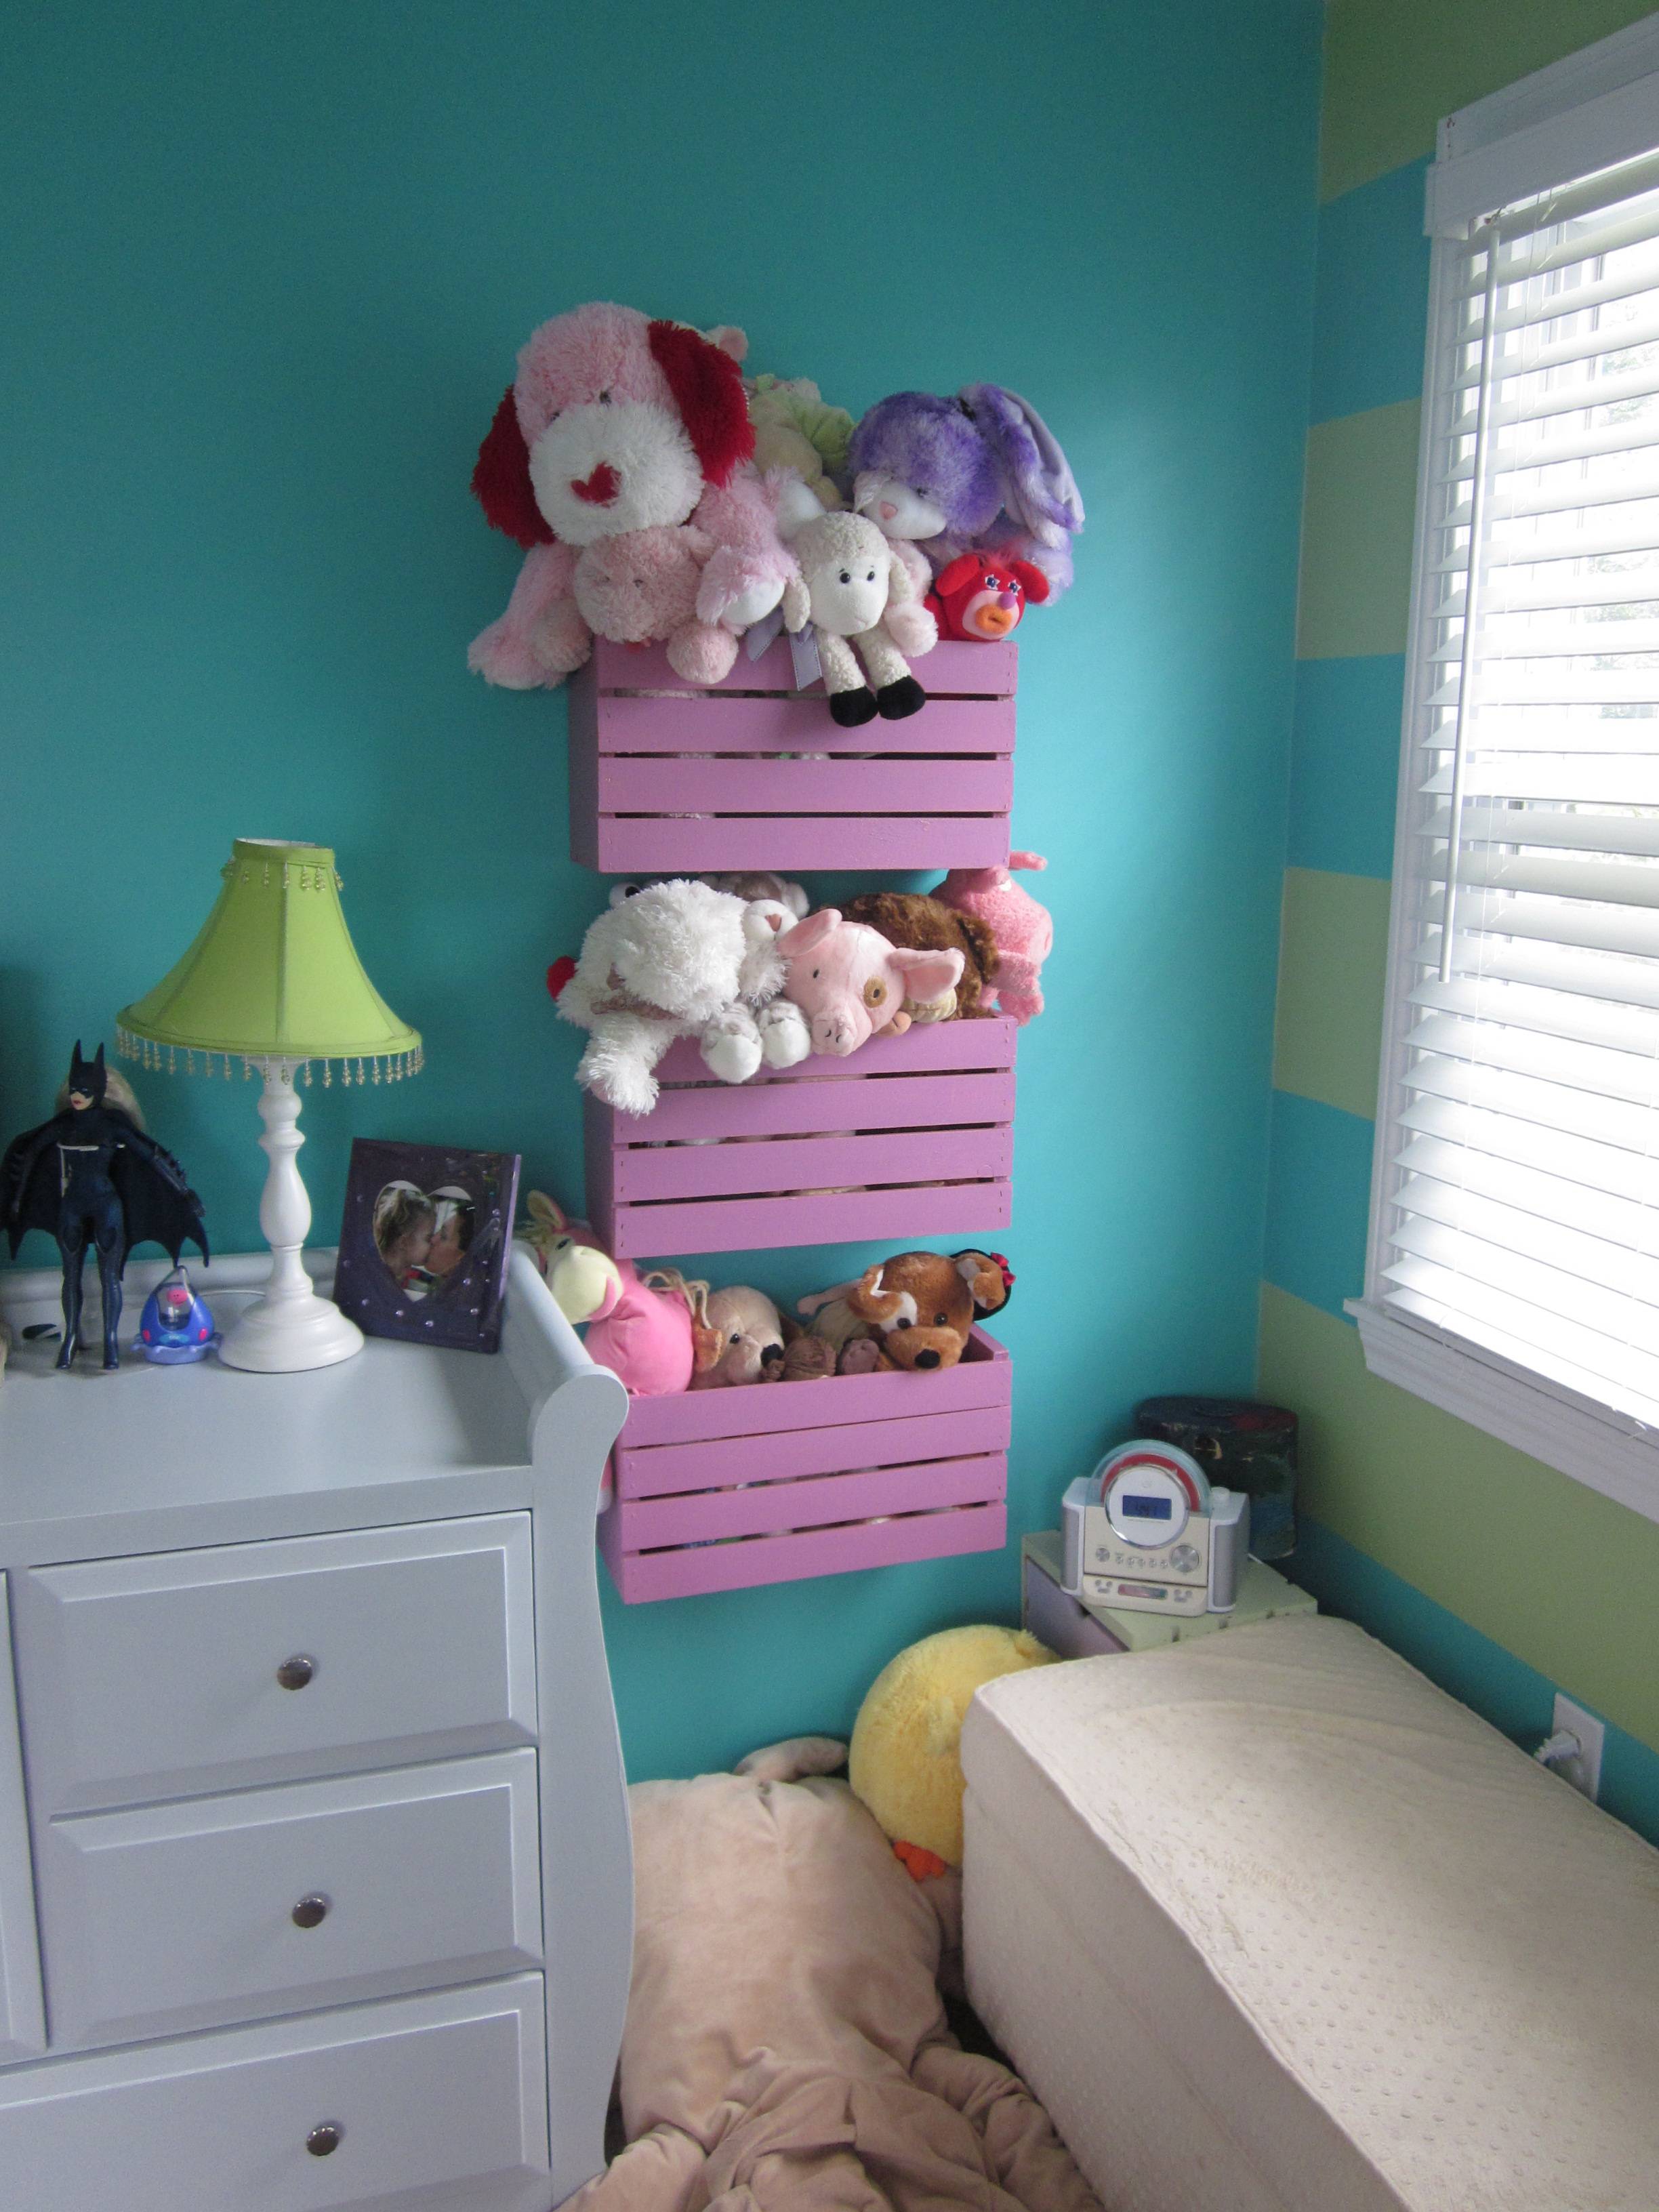 20+ Creative DIY Ways to Organize and Store Stuffed Animal Toys --> Crates Mounted on the Wall as Storage Bins for Stuffed Animals